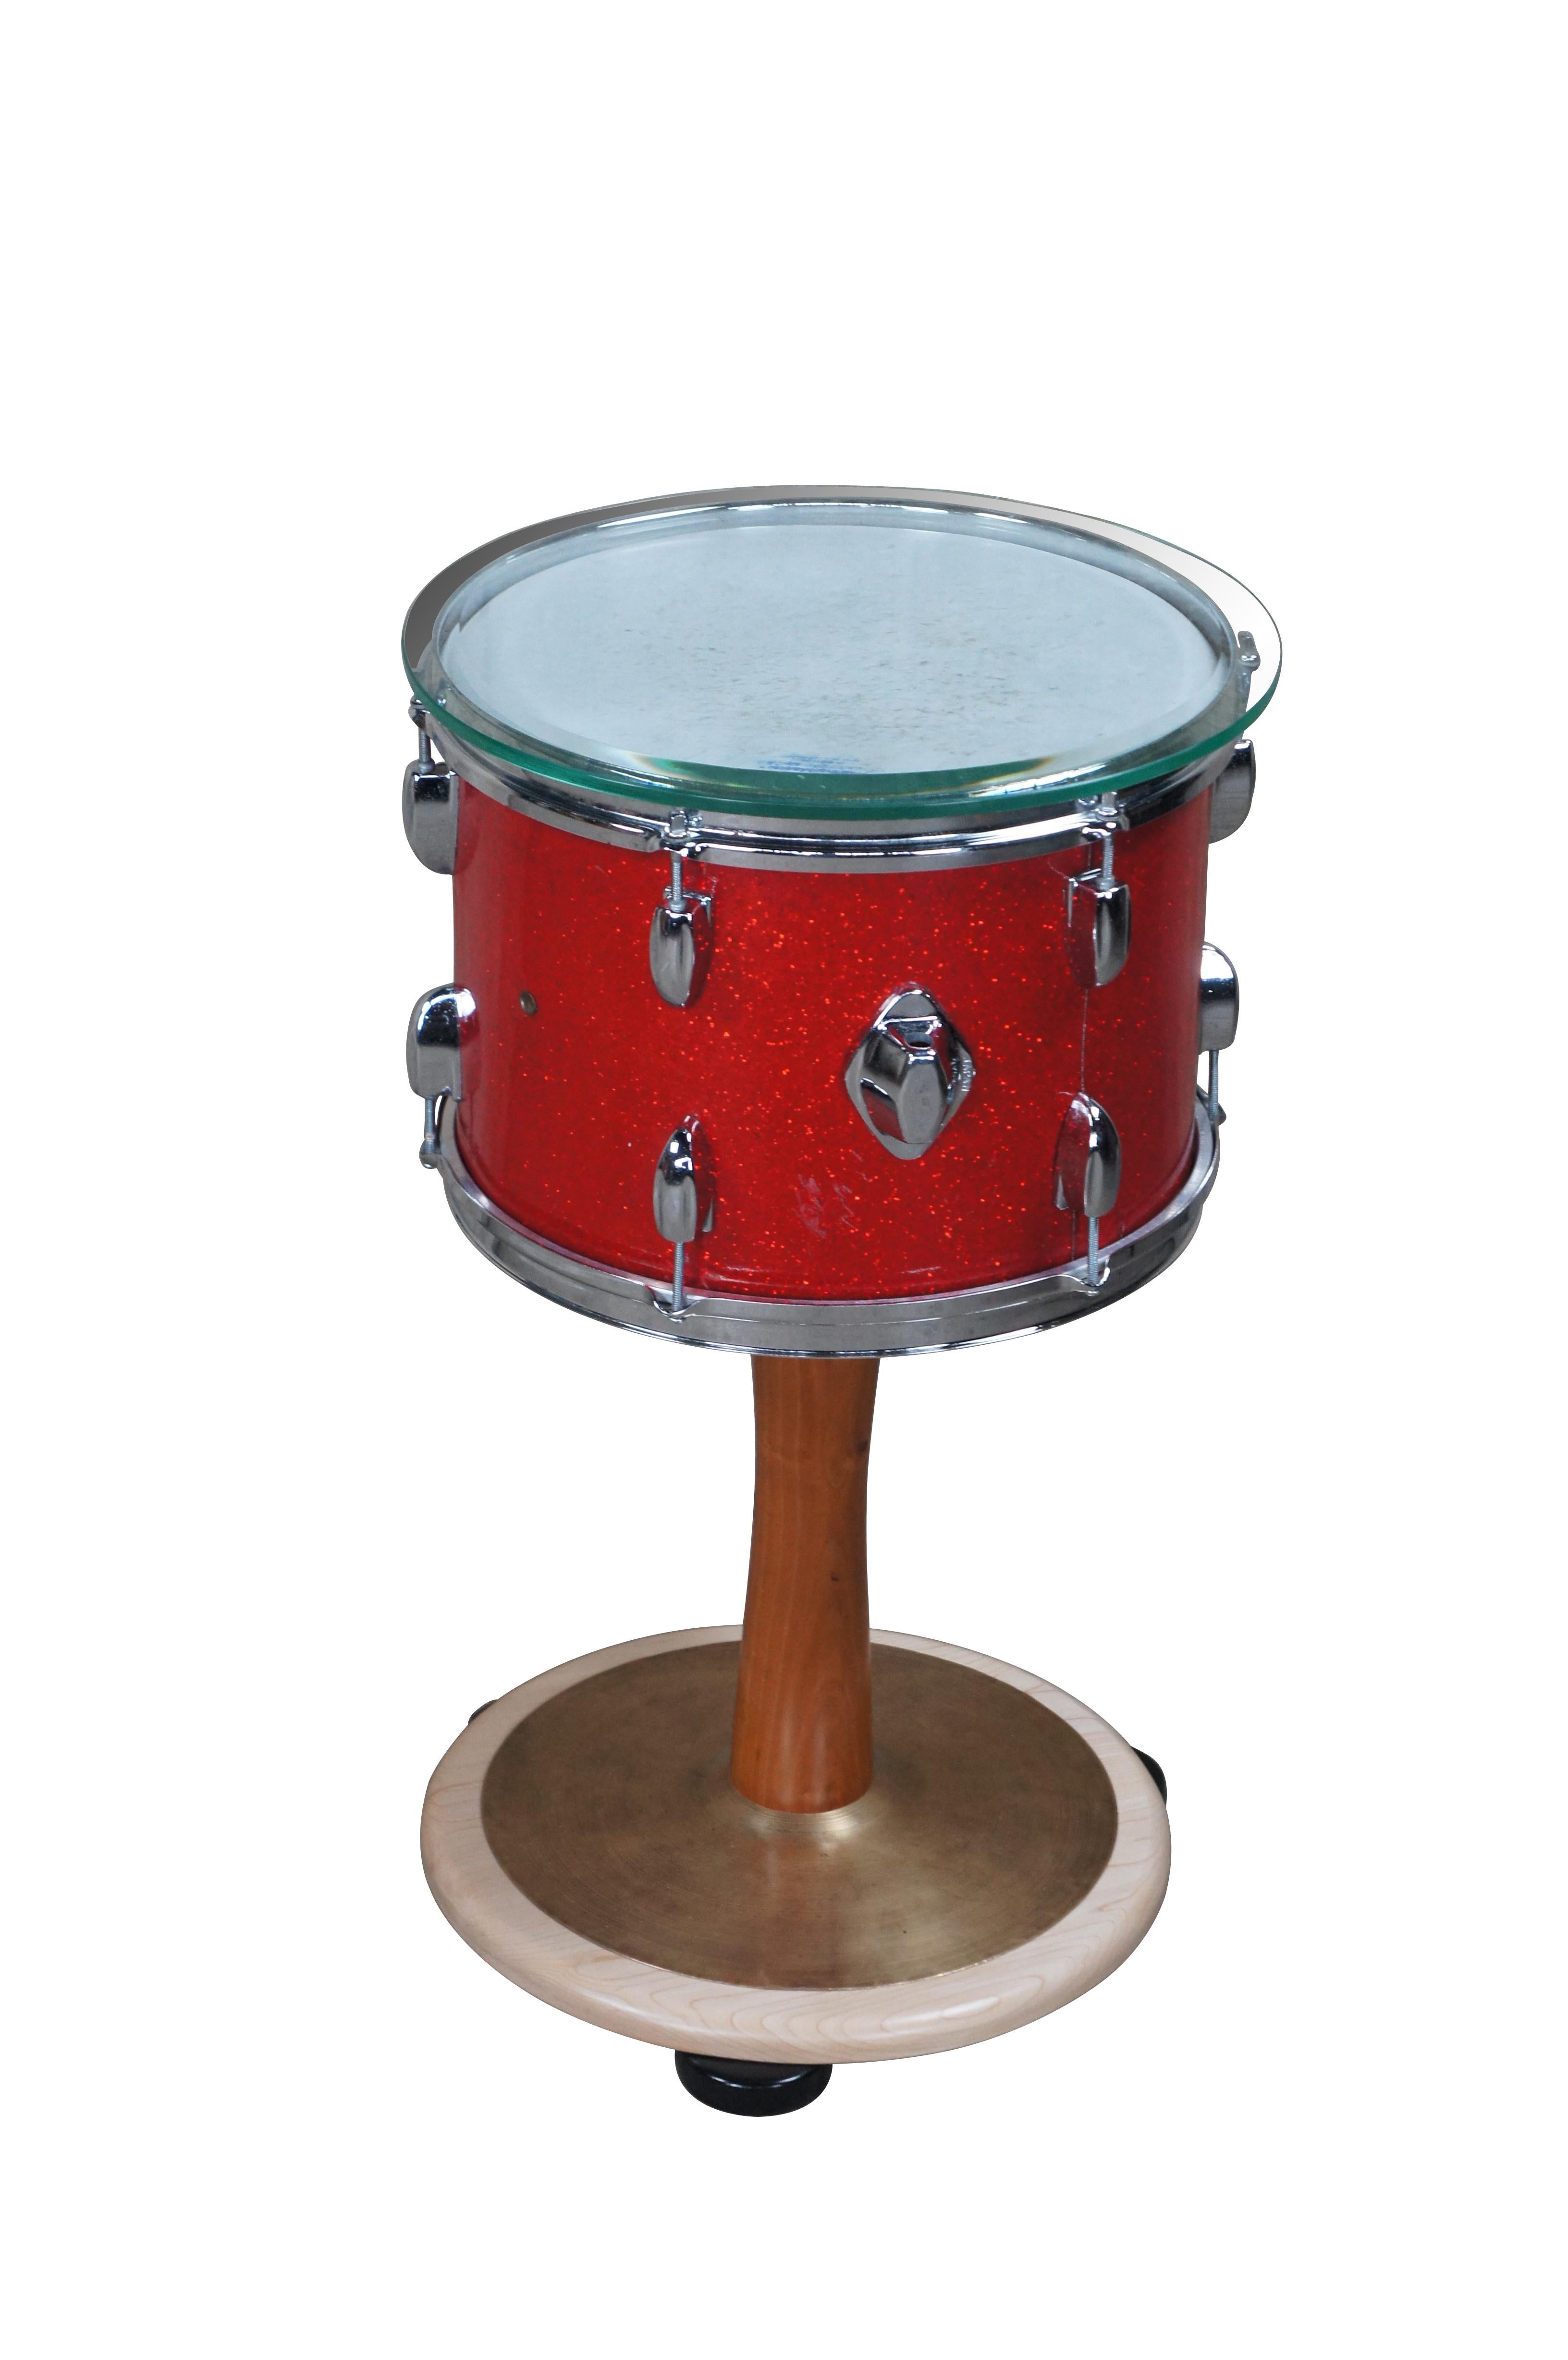 Vintage reclaimed / arts & crafts drum side table.  Made from an old Ludwig drum with red sparkle varnish, turned support and cymbal accent base.

Dimensions:
15